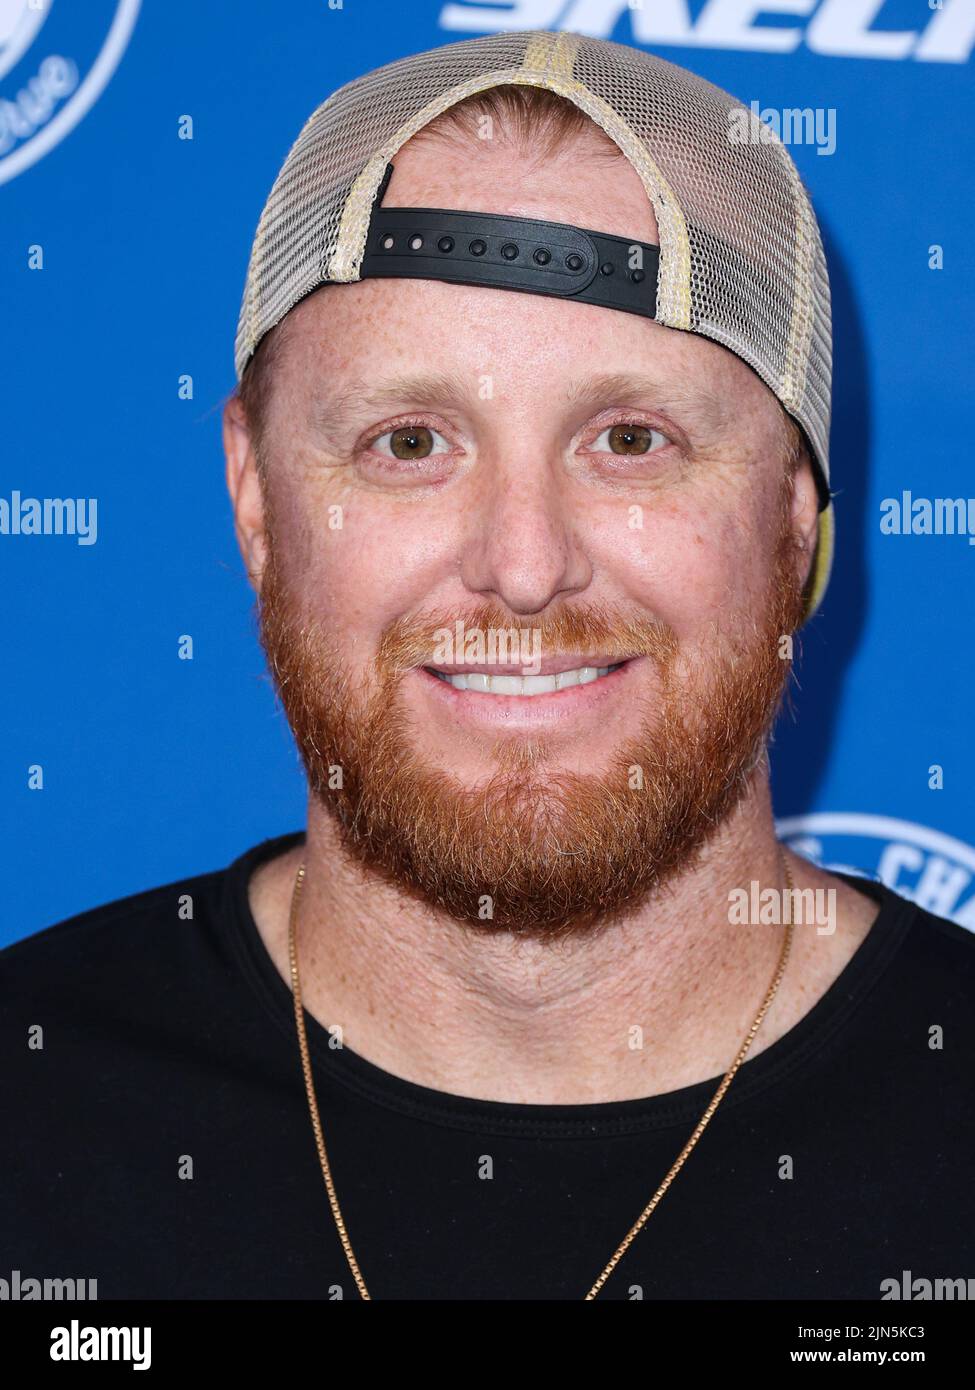 ELYSIAN PARK, LOS ANGELES, CALIFORNIA, USA - AUGUST 08: American professional baseball third baseman for the Los Angeles Dodgers of Major League Baseball Justin Turner arrives at Kershaw's Challenge Ping Pong 4 Purpose 2022 held at Dodger Stadium on August 8, 2022 in Elysian Park, Los Angeles, California, United States. (Photo by Xavier Collin/Image Press Agency) Stock Photo